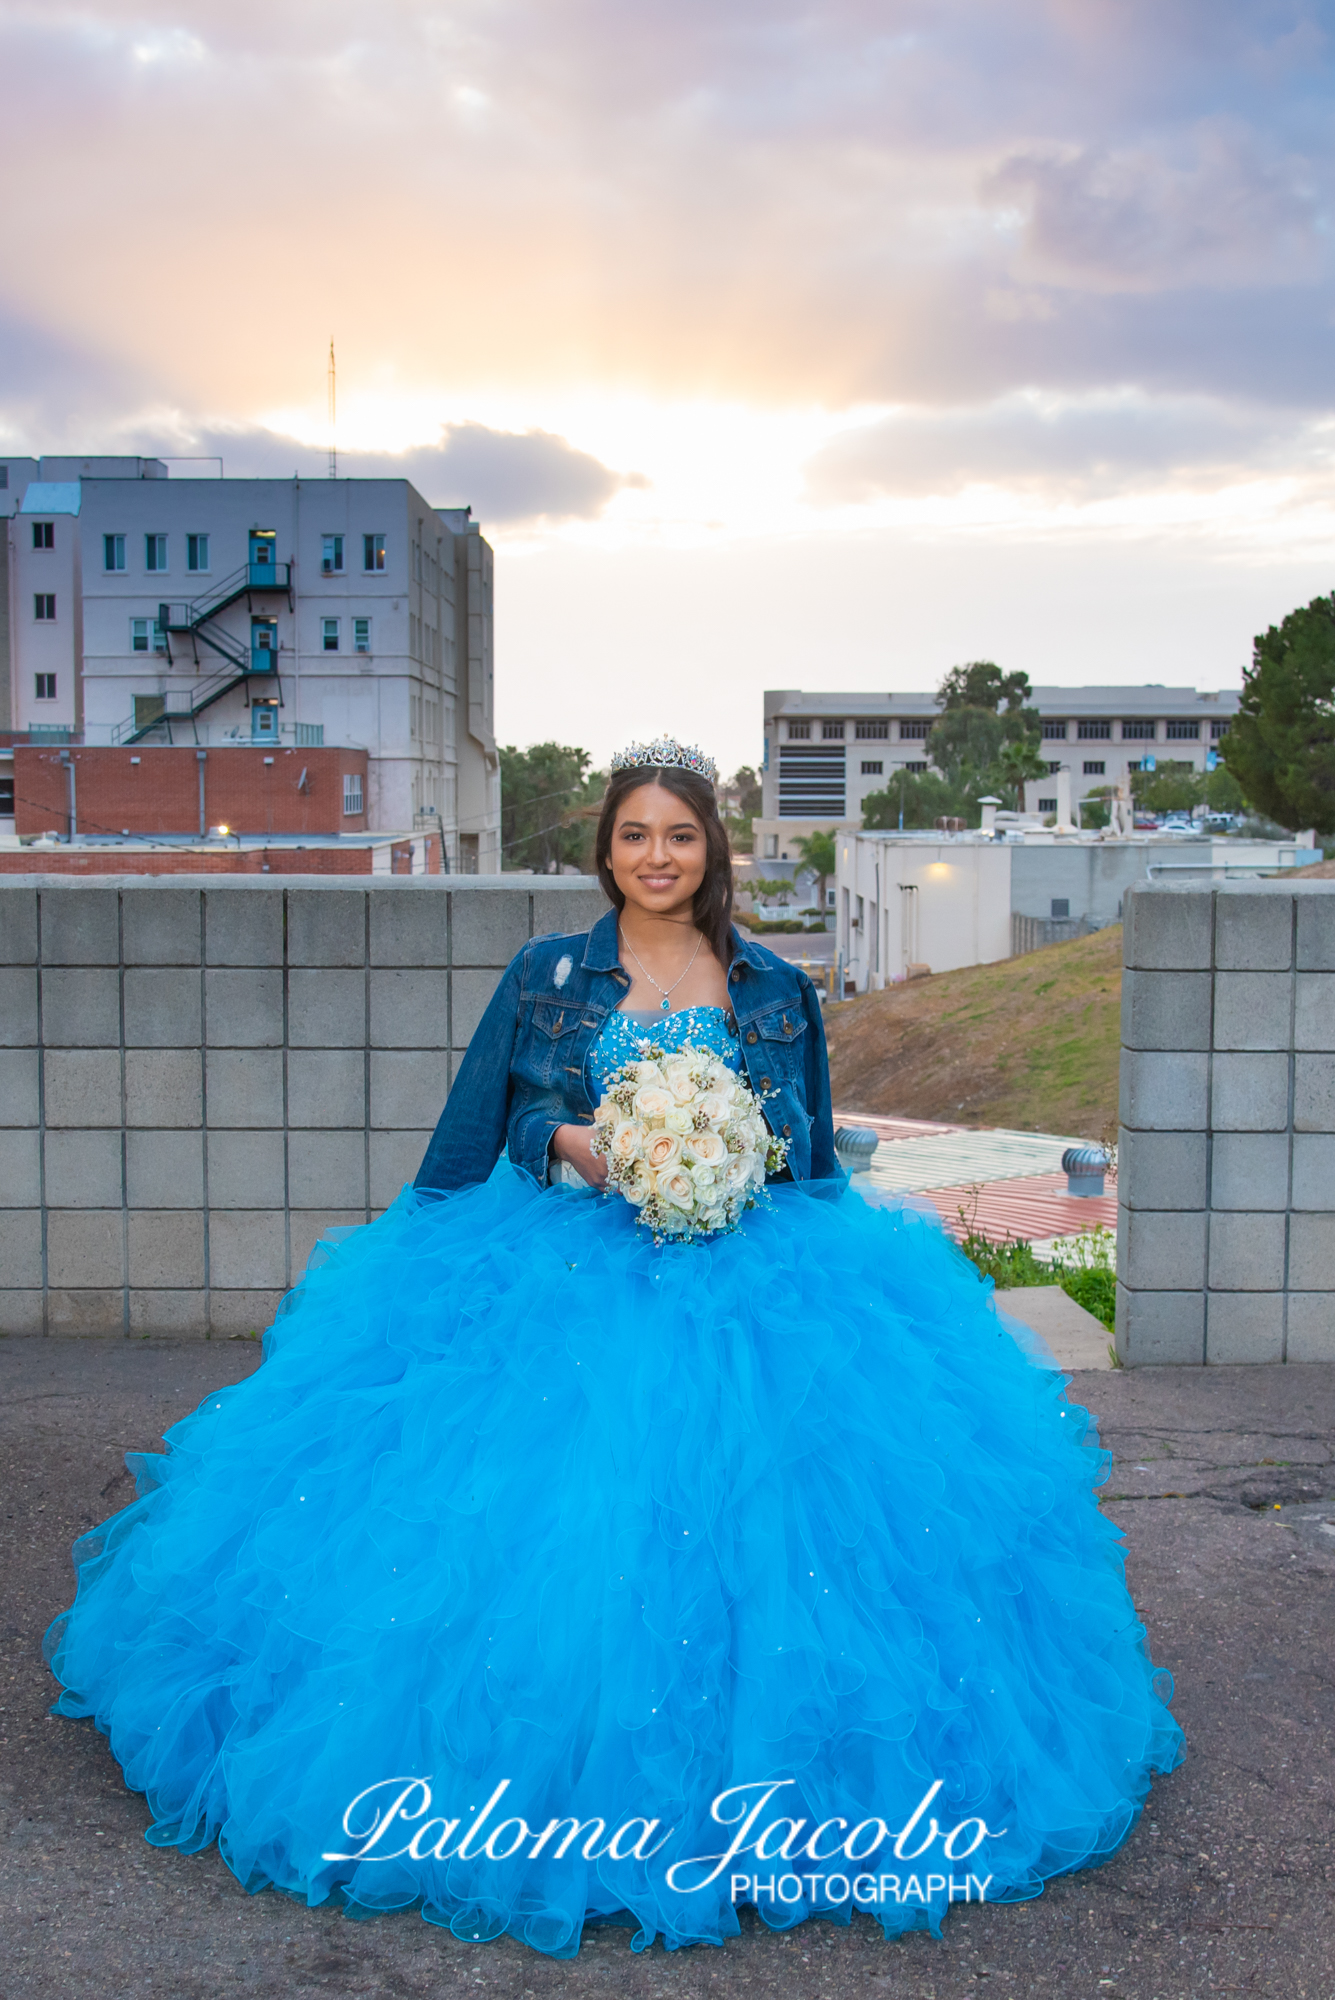 Quinceanera wearing denim jacket on urban city background at sunset by Paloma Jacobo Photography